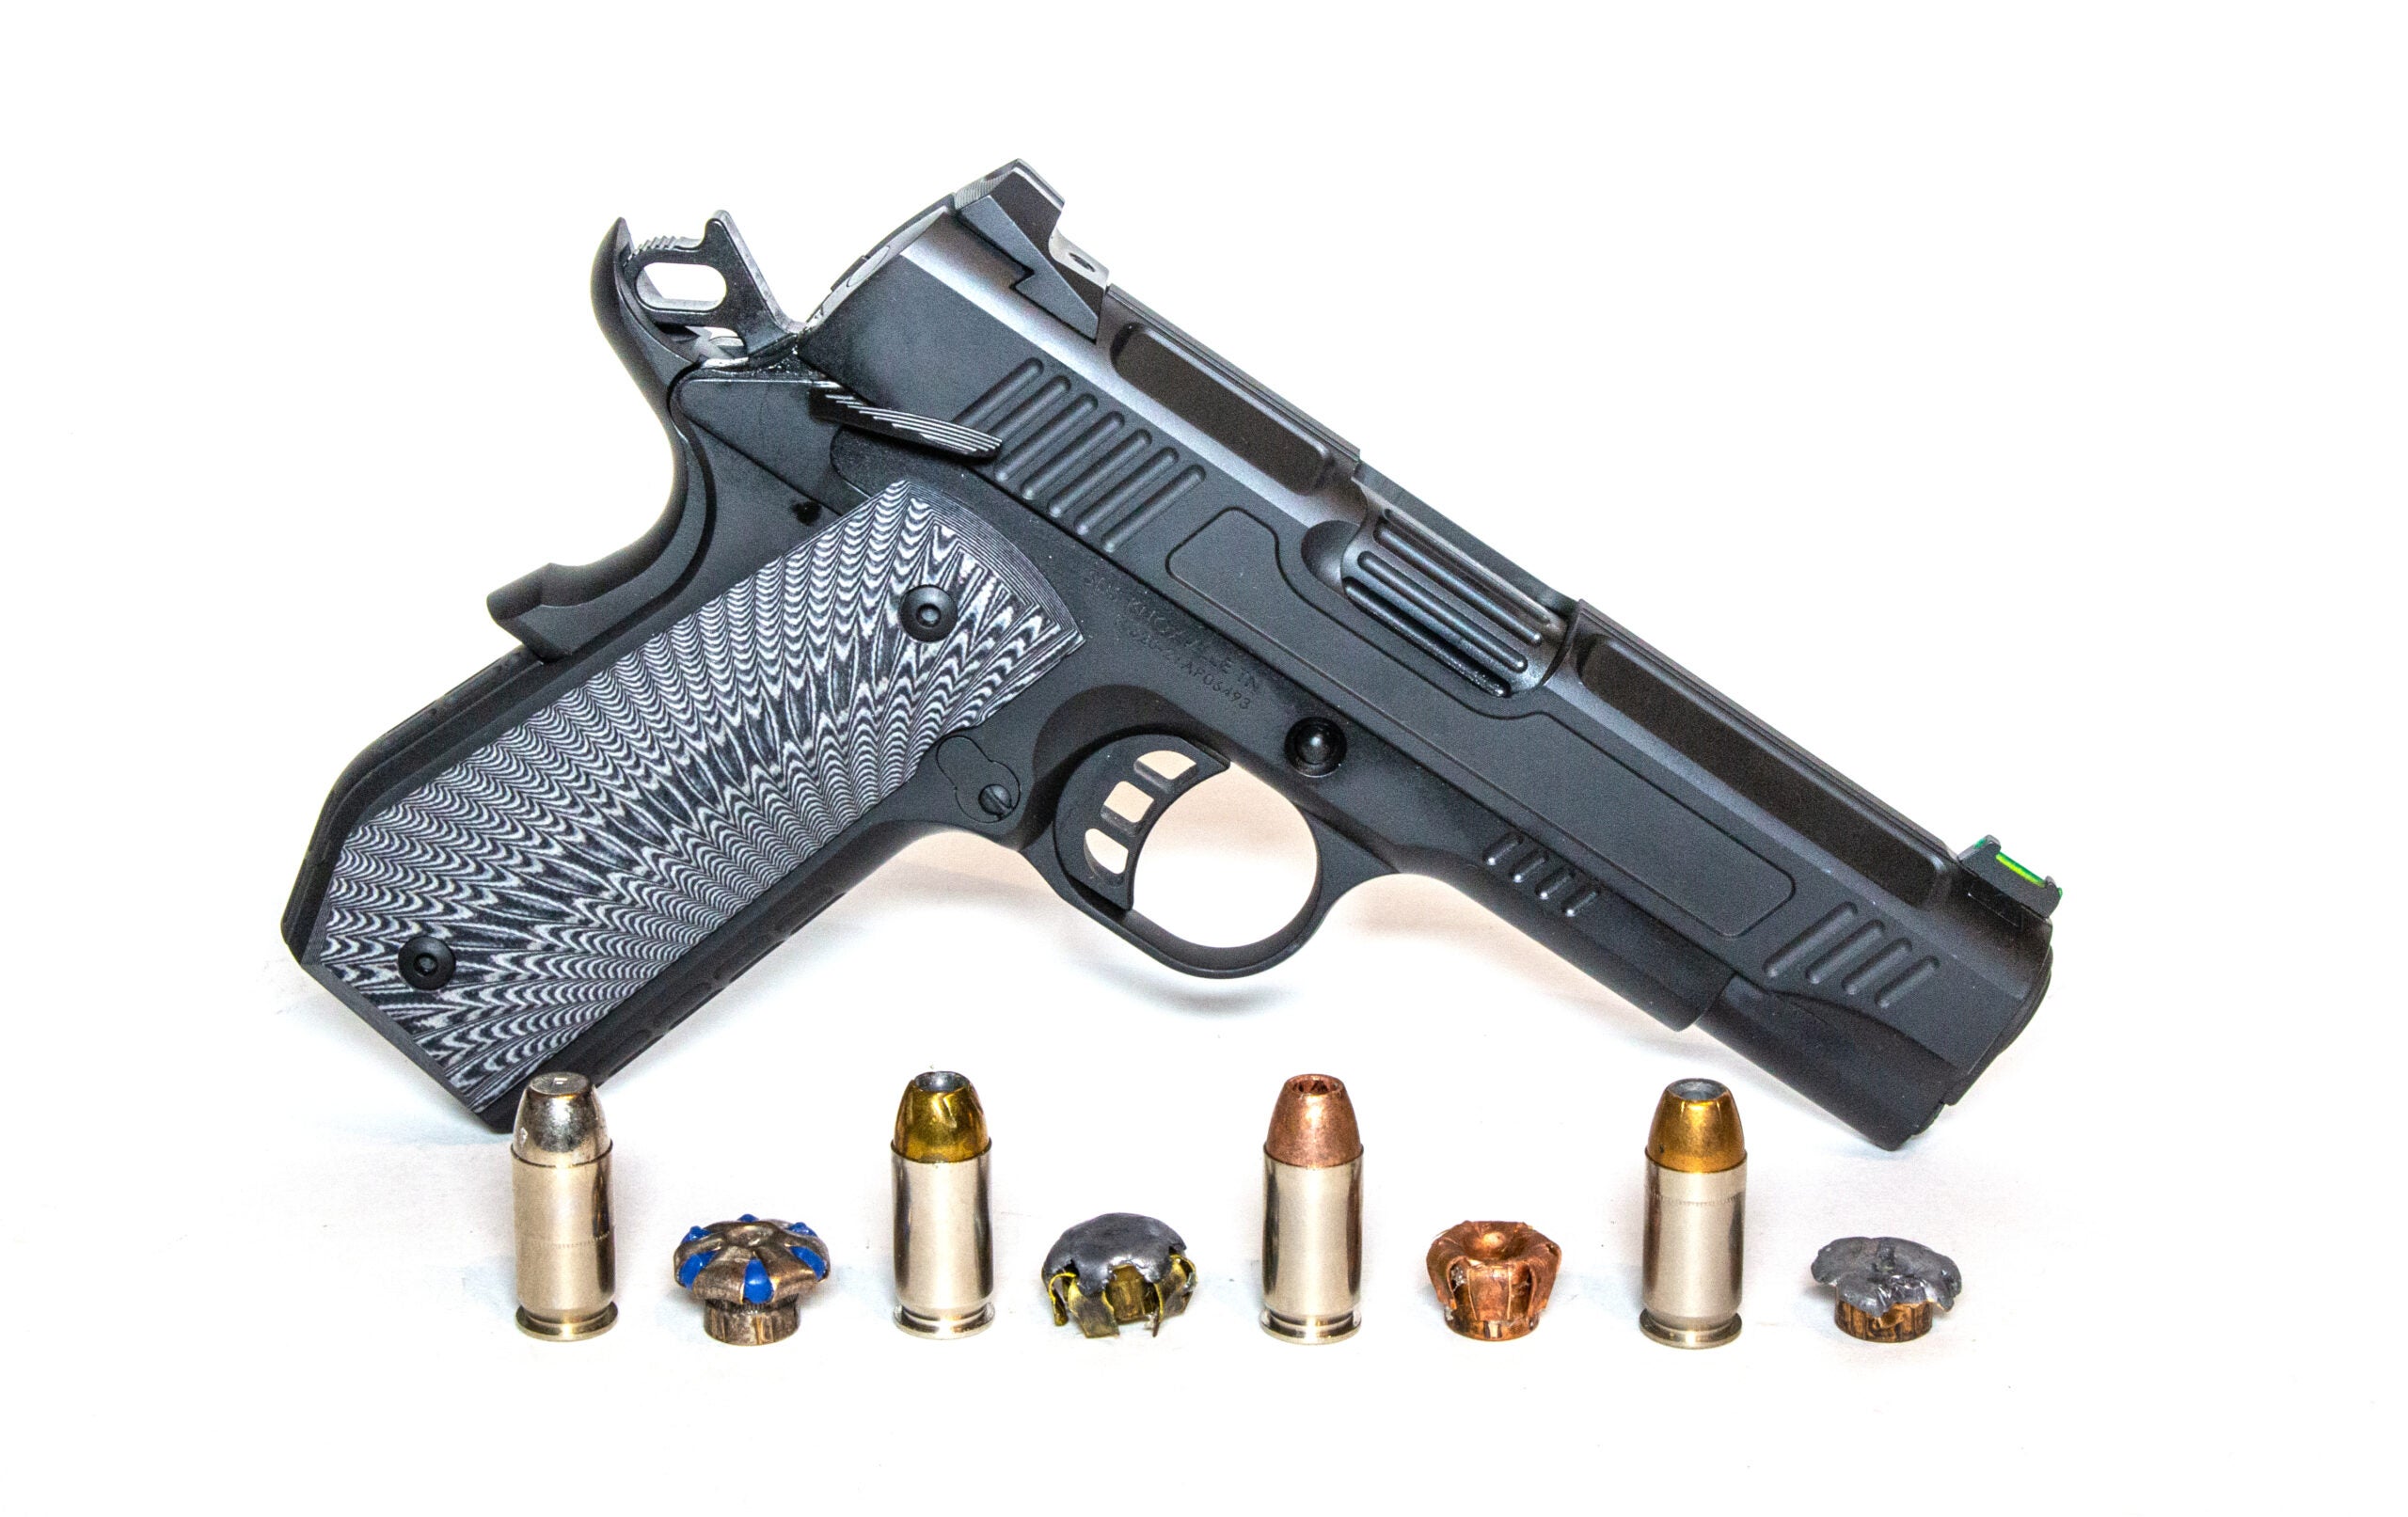 Police firearms: How to inspect your duty ammunition